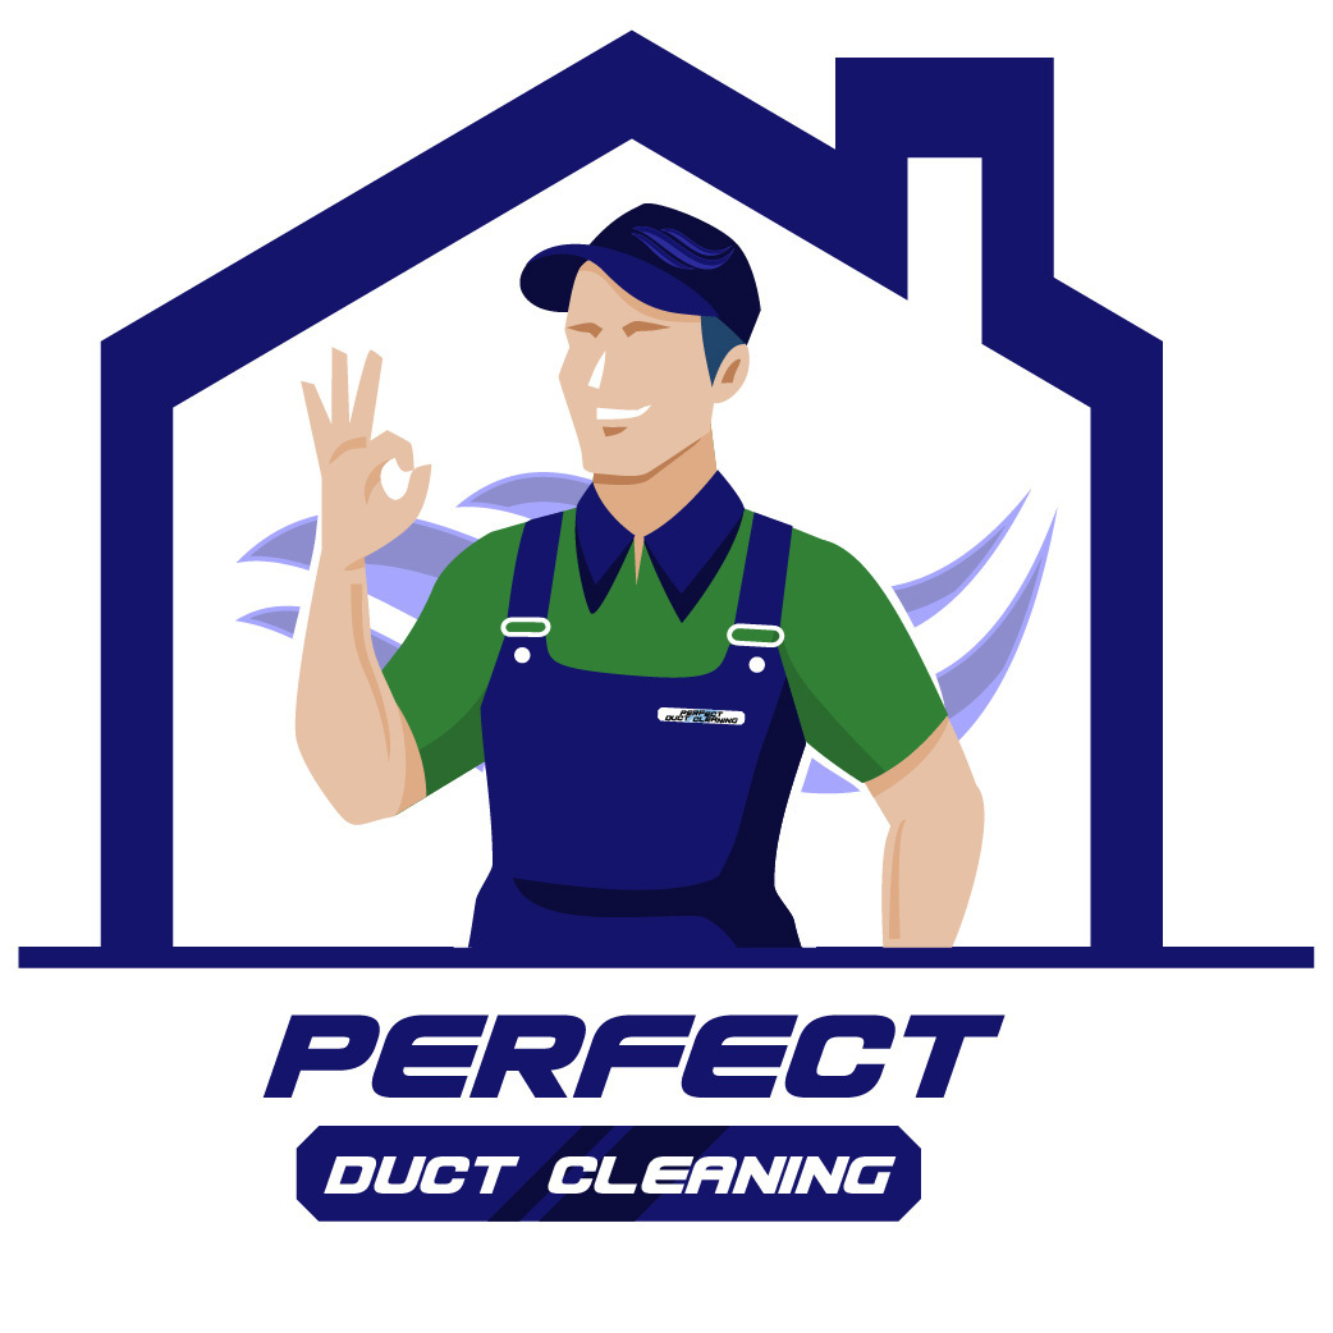 Perfect Duct Cleanings